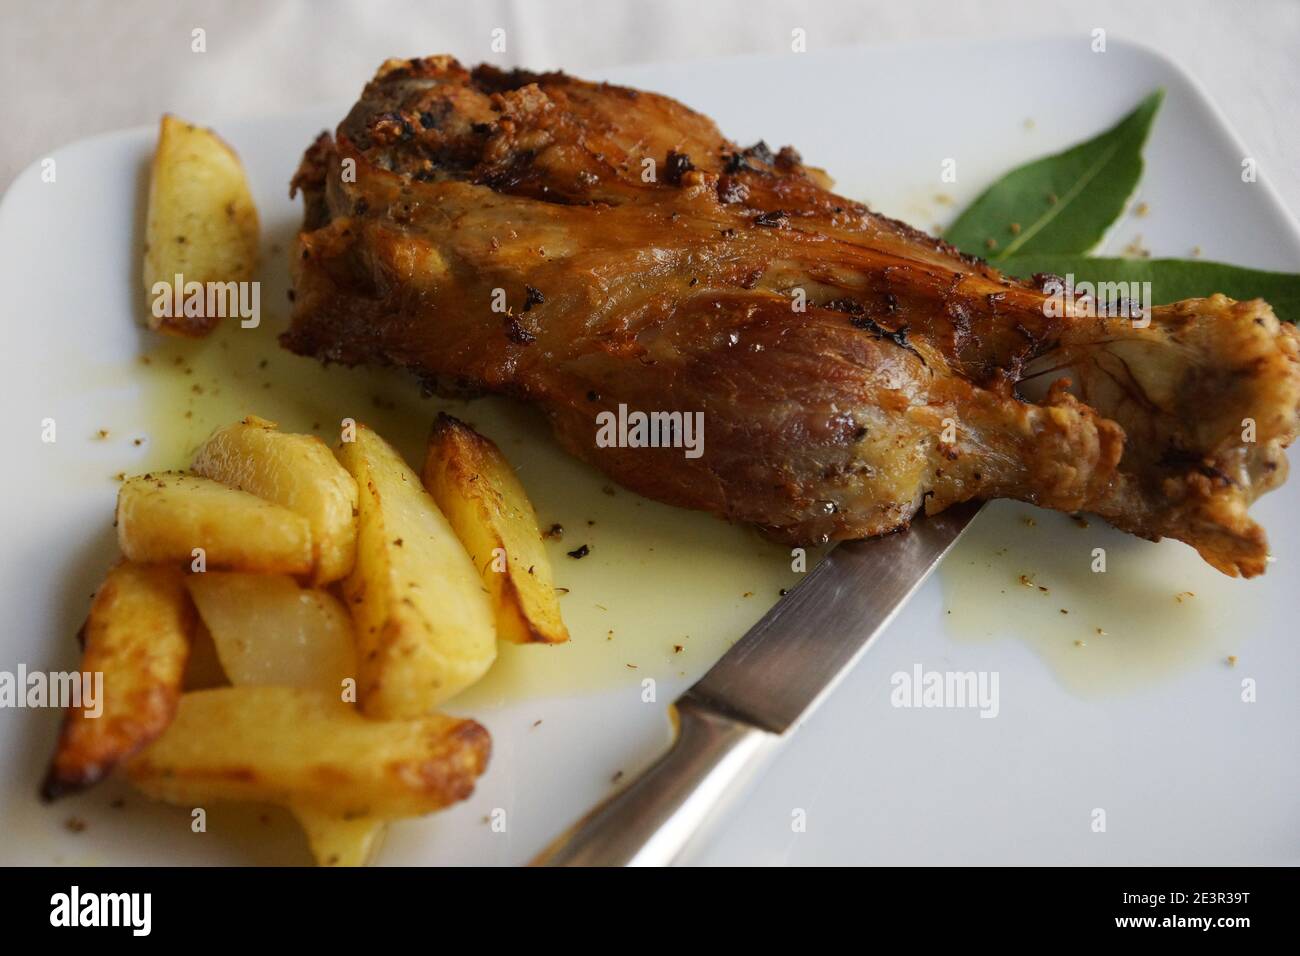 A ham hock (or hough) or pork knuckle with French fries Stock Photo